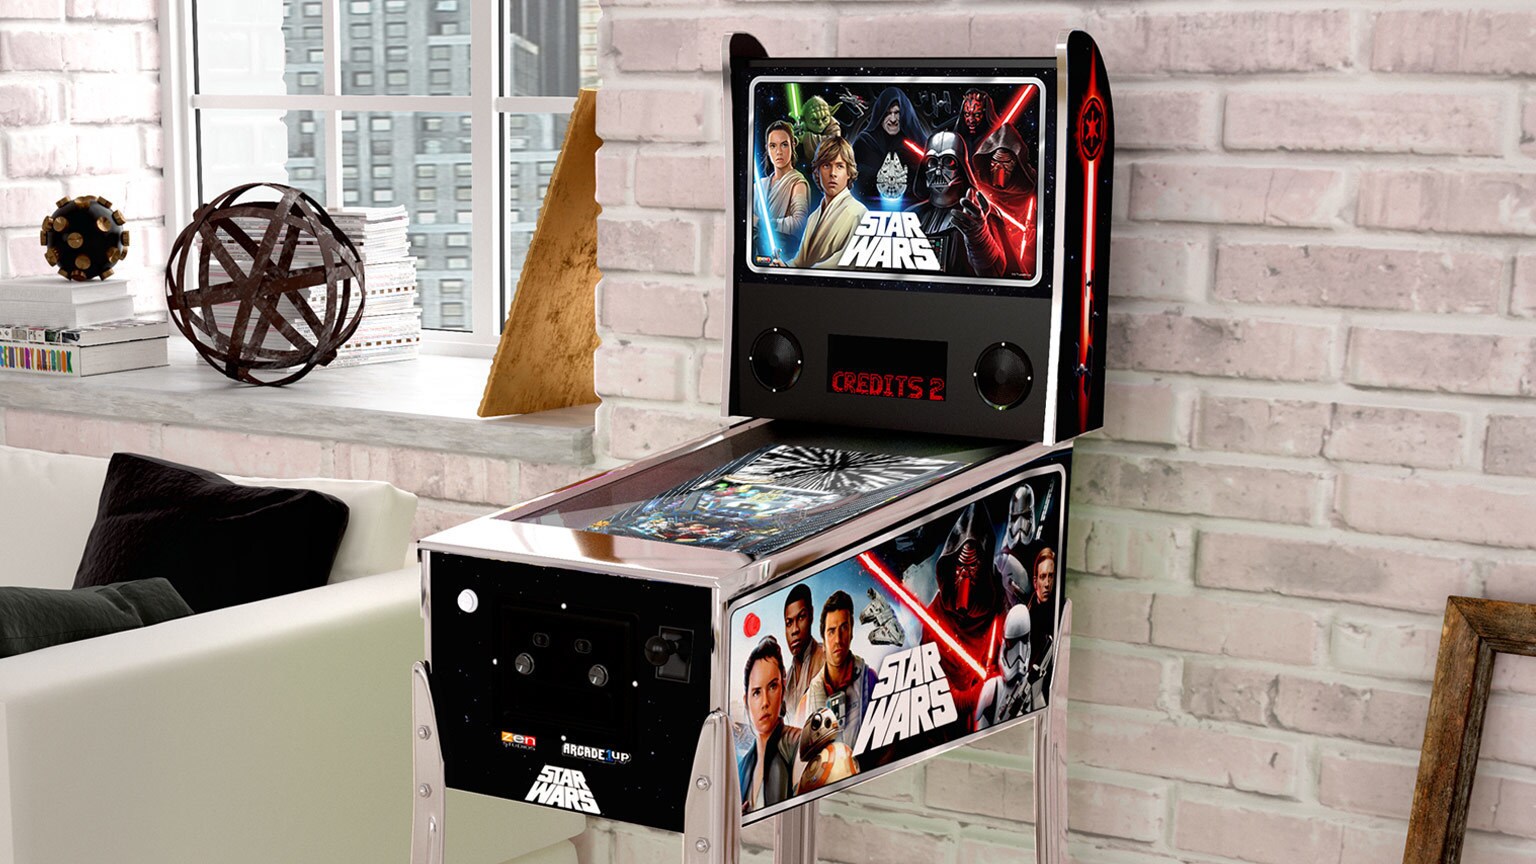 Star Wars Pinball Readies to Change the Game at Home